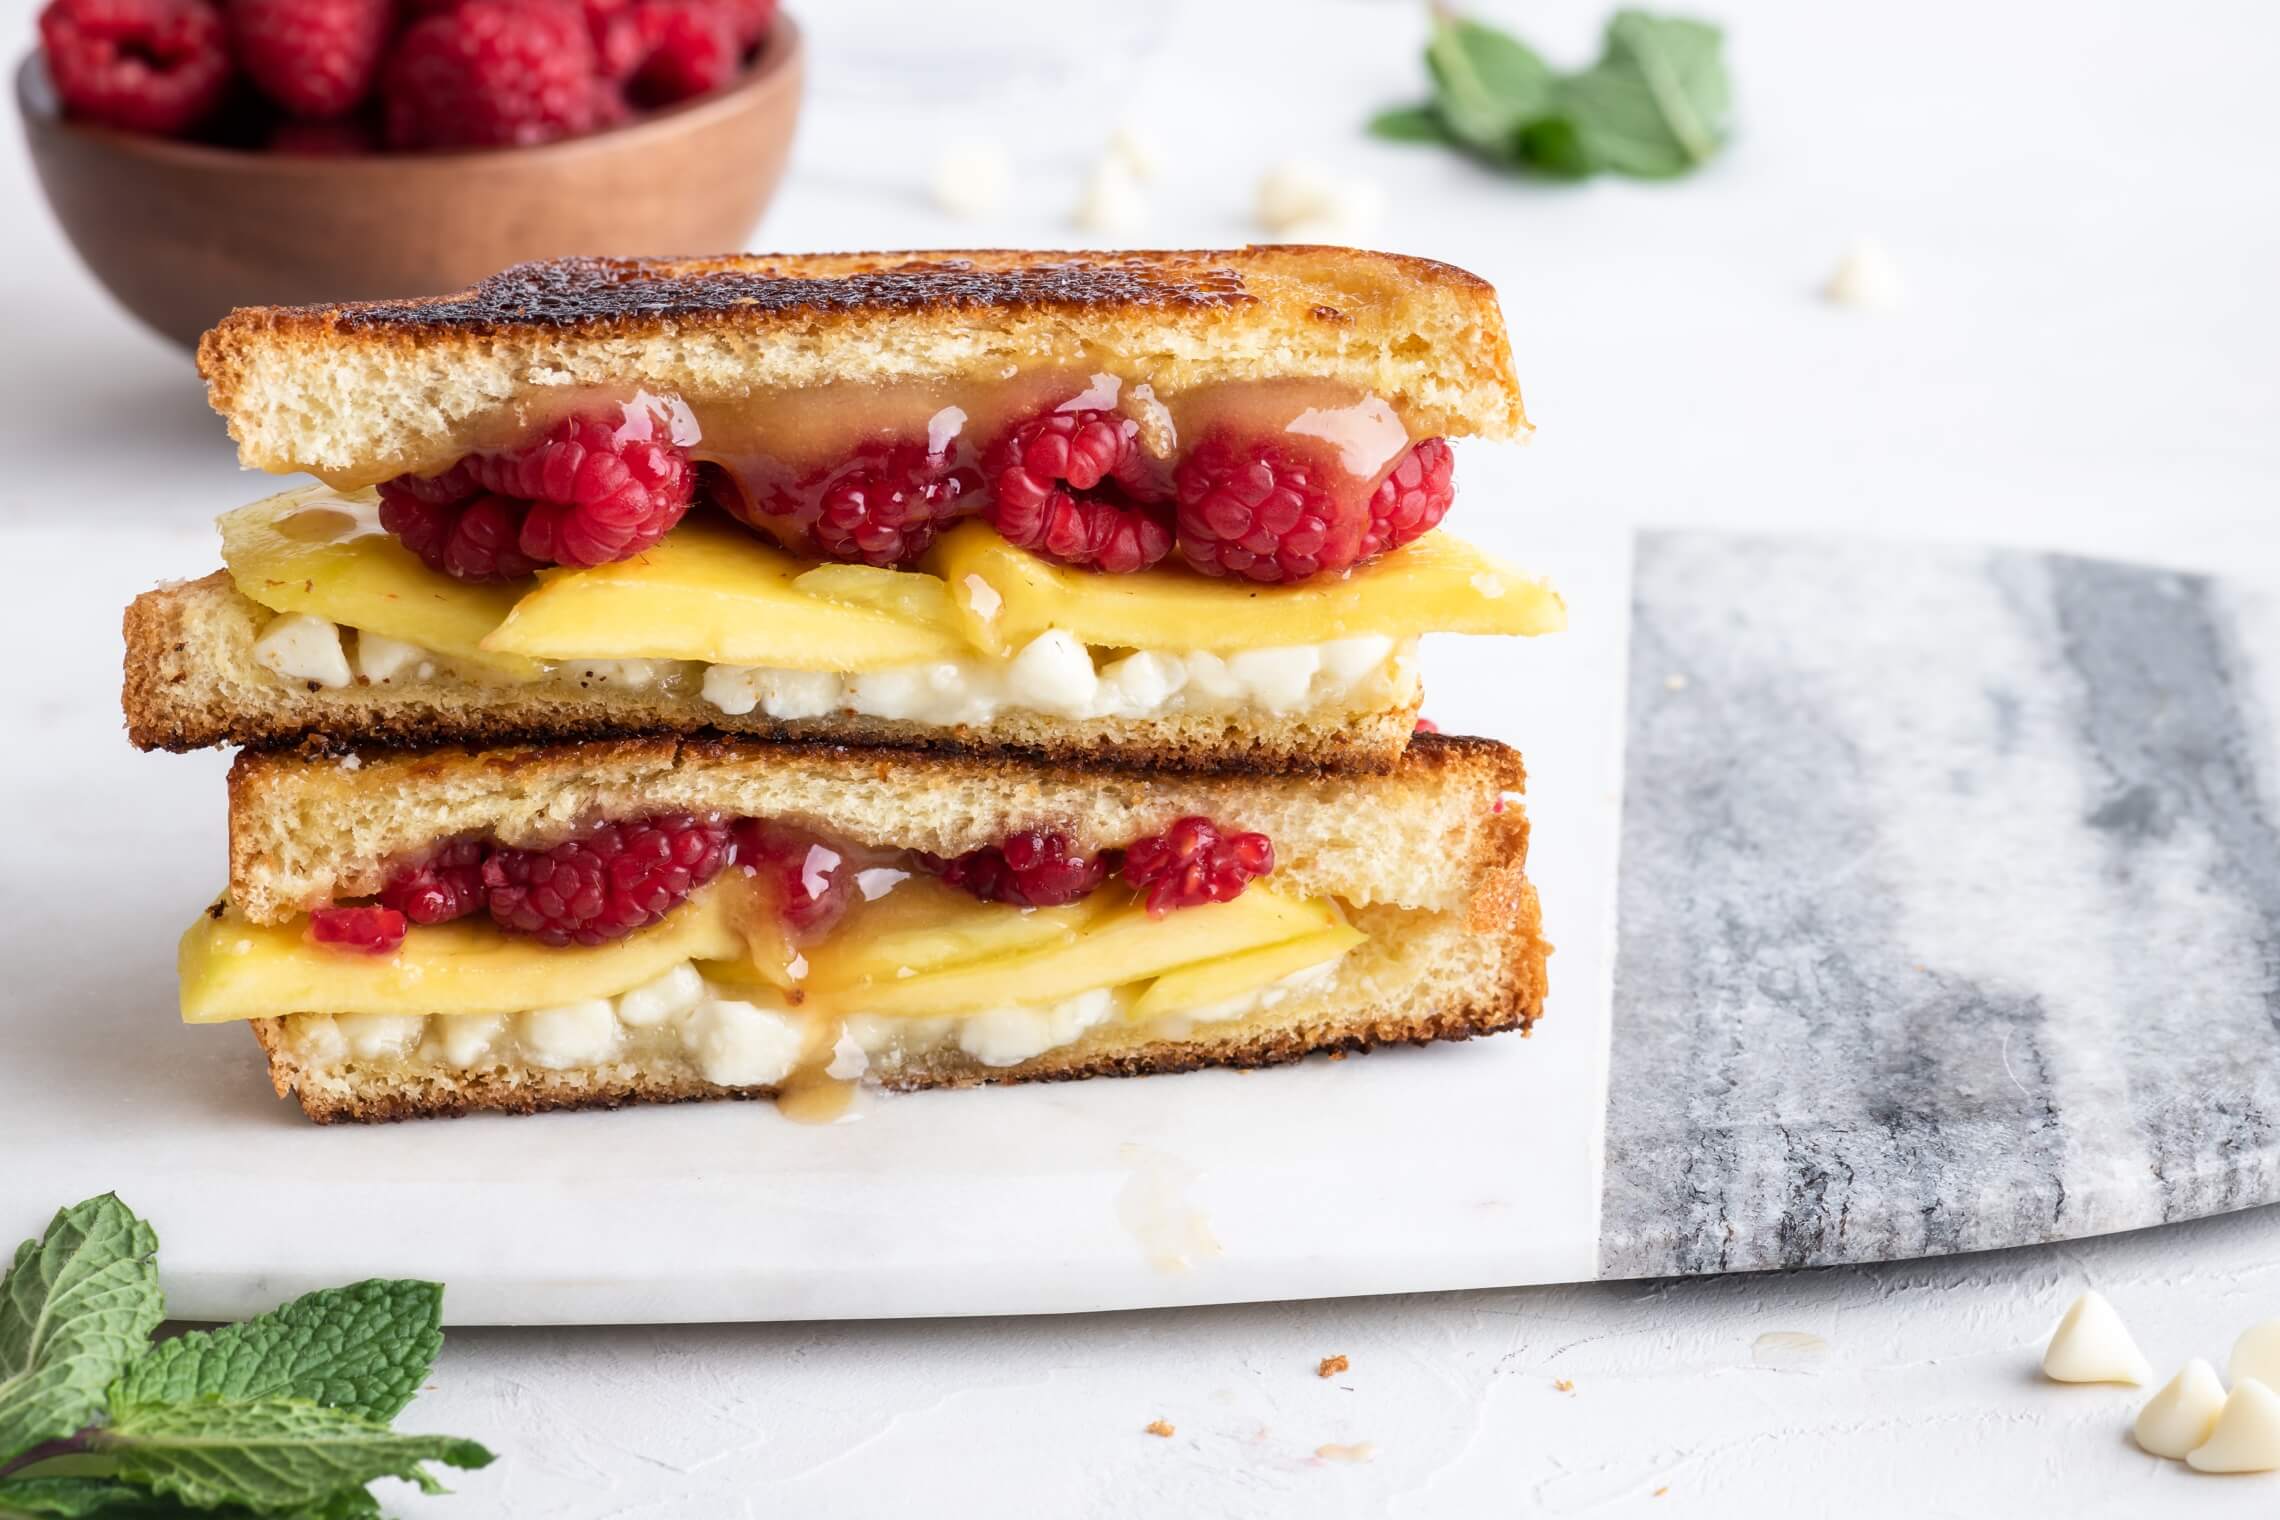 White Chocolate Caramel Grilled Cheese with Raspberries and Mango